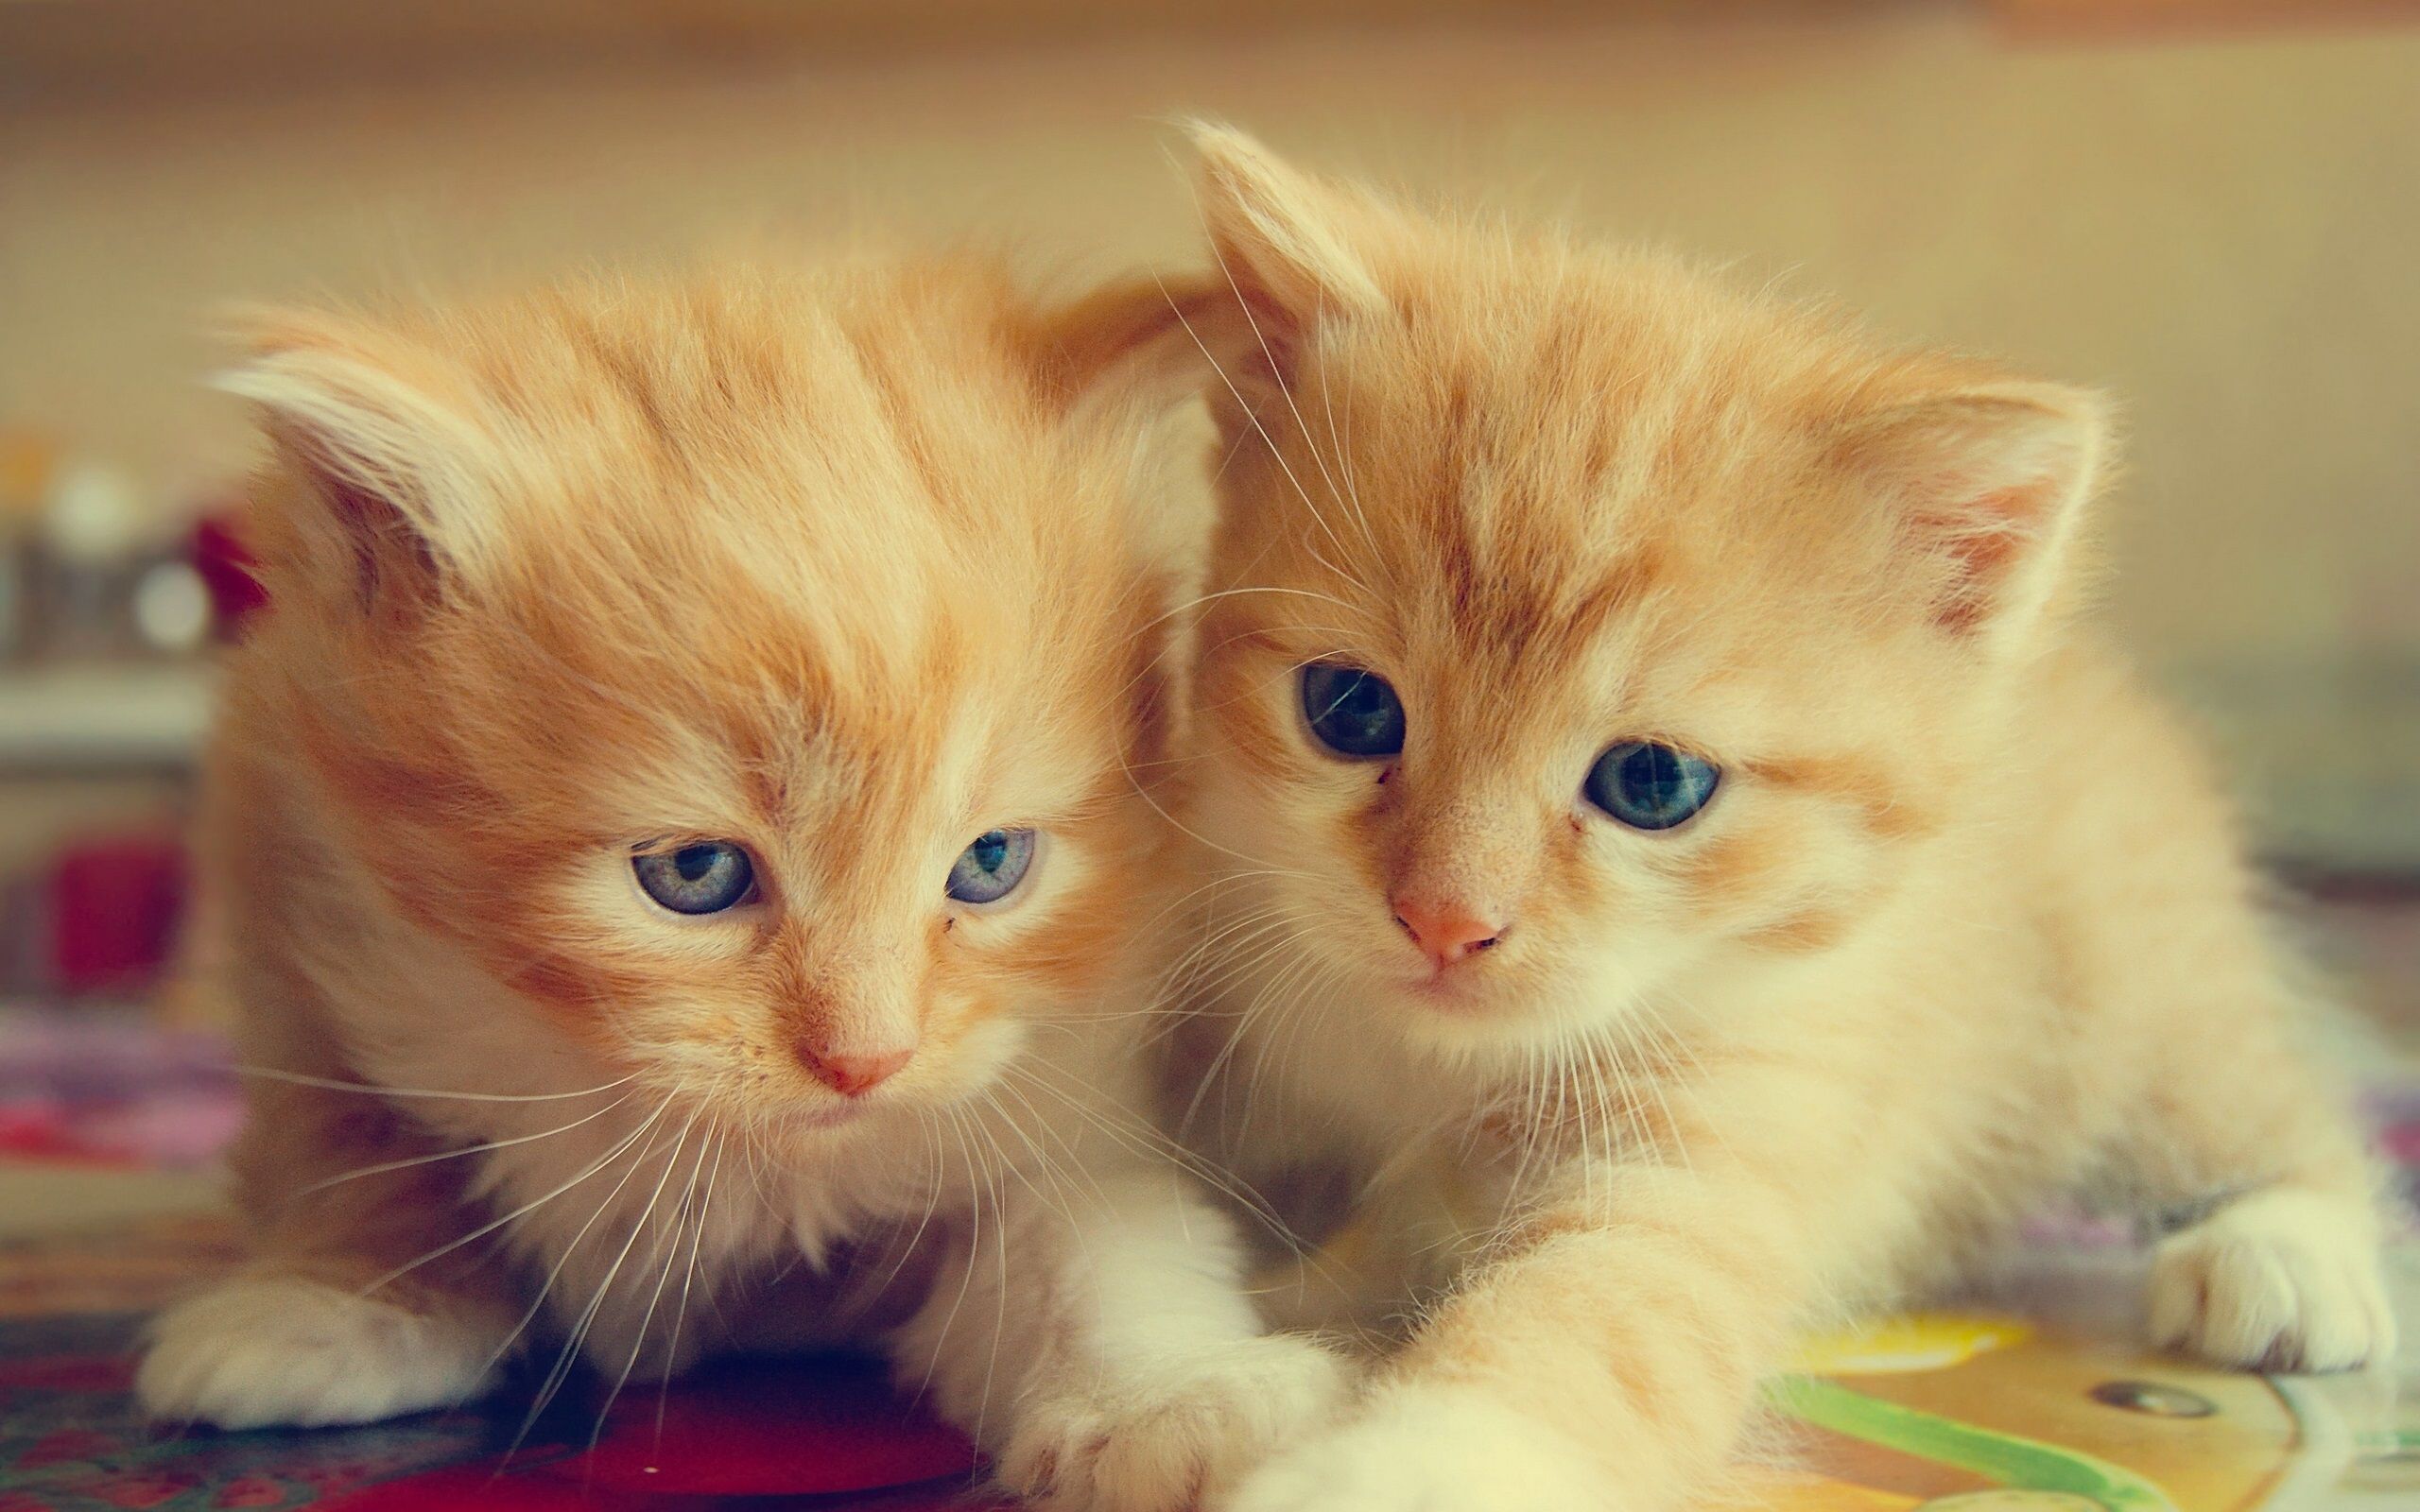 Wallpaper Furry kittens, two cats 2560x1600 HD Picture, Image